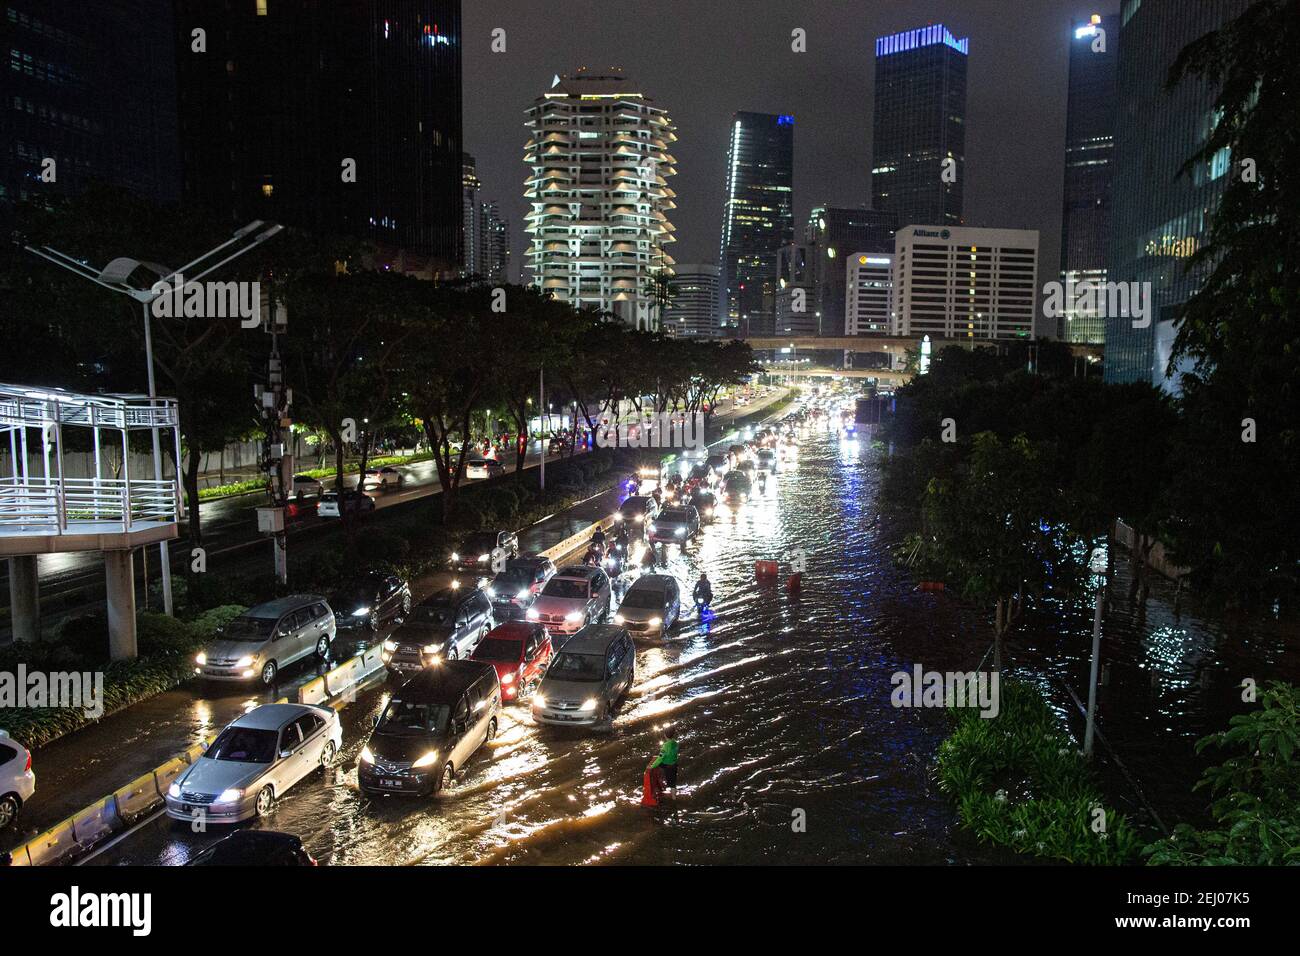 Jakarta, Jakarta, Indonesia. 20th Feb, 2021. A view of traffic jam during a flood following heavy rains at business district in Jakarta, Indonesia on February 20, 2021. At least 21 areas in the Indonesian capital were hit by floods Saturday following heavy rains, during which thousands of homes were also damaged, according to the National Board for Disaster Management Credit: Afriadi Hikmal/ZUMA Wire/Alamy Live News Stock Photo